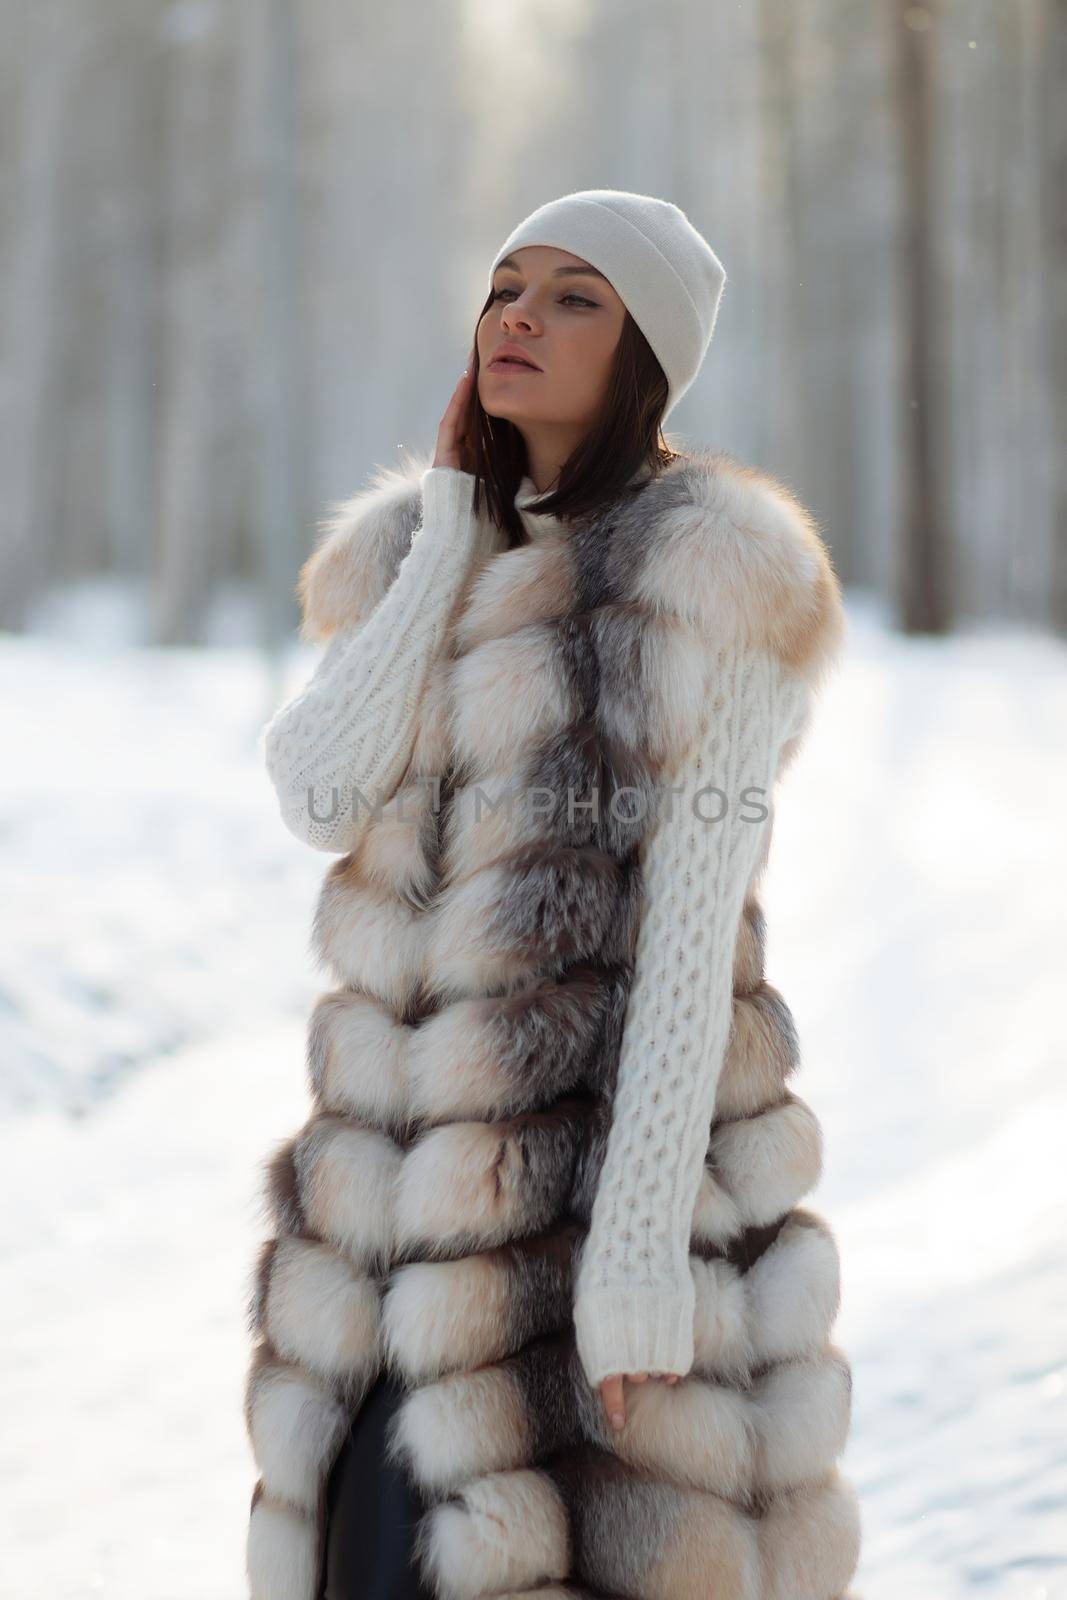 Gorgeous young brunette in fur vest and white knitwear looking confidently away against trees in winter woods